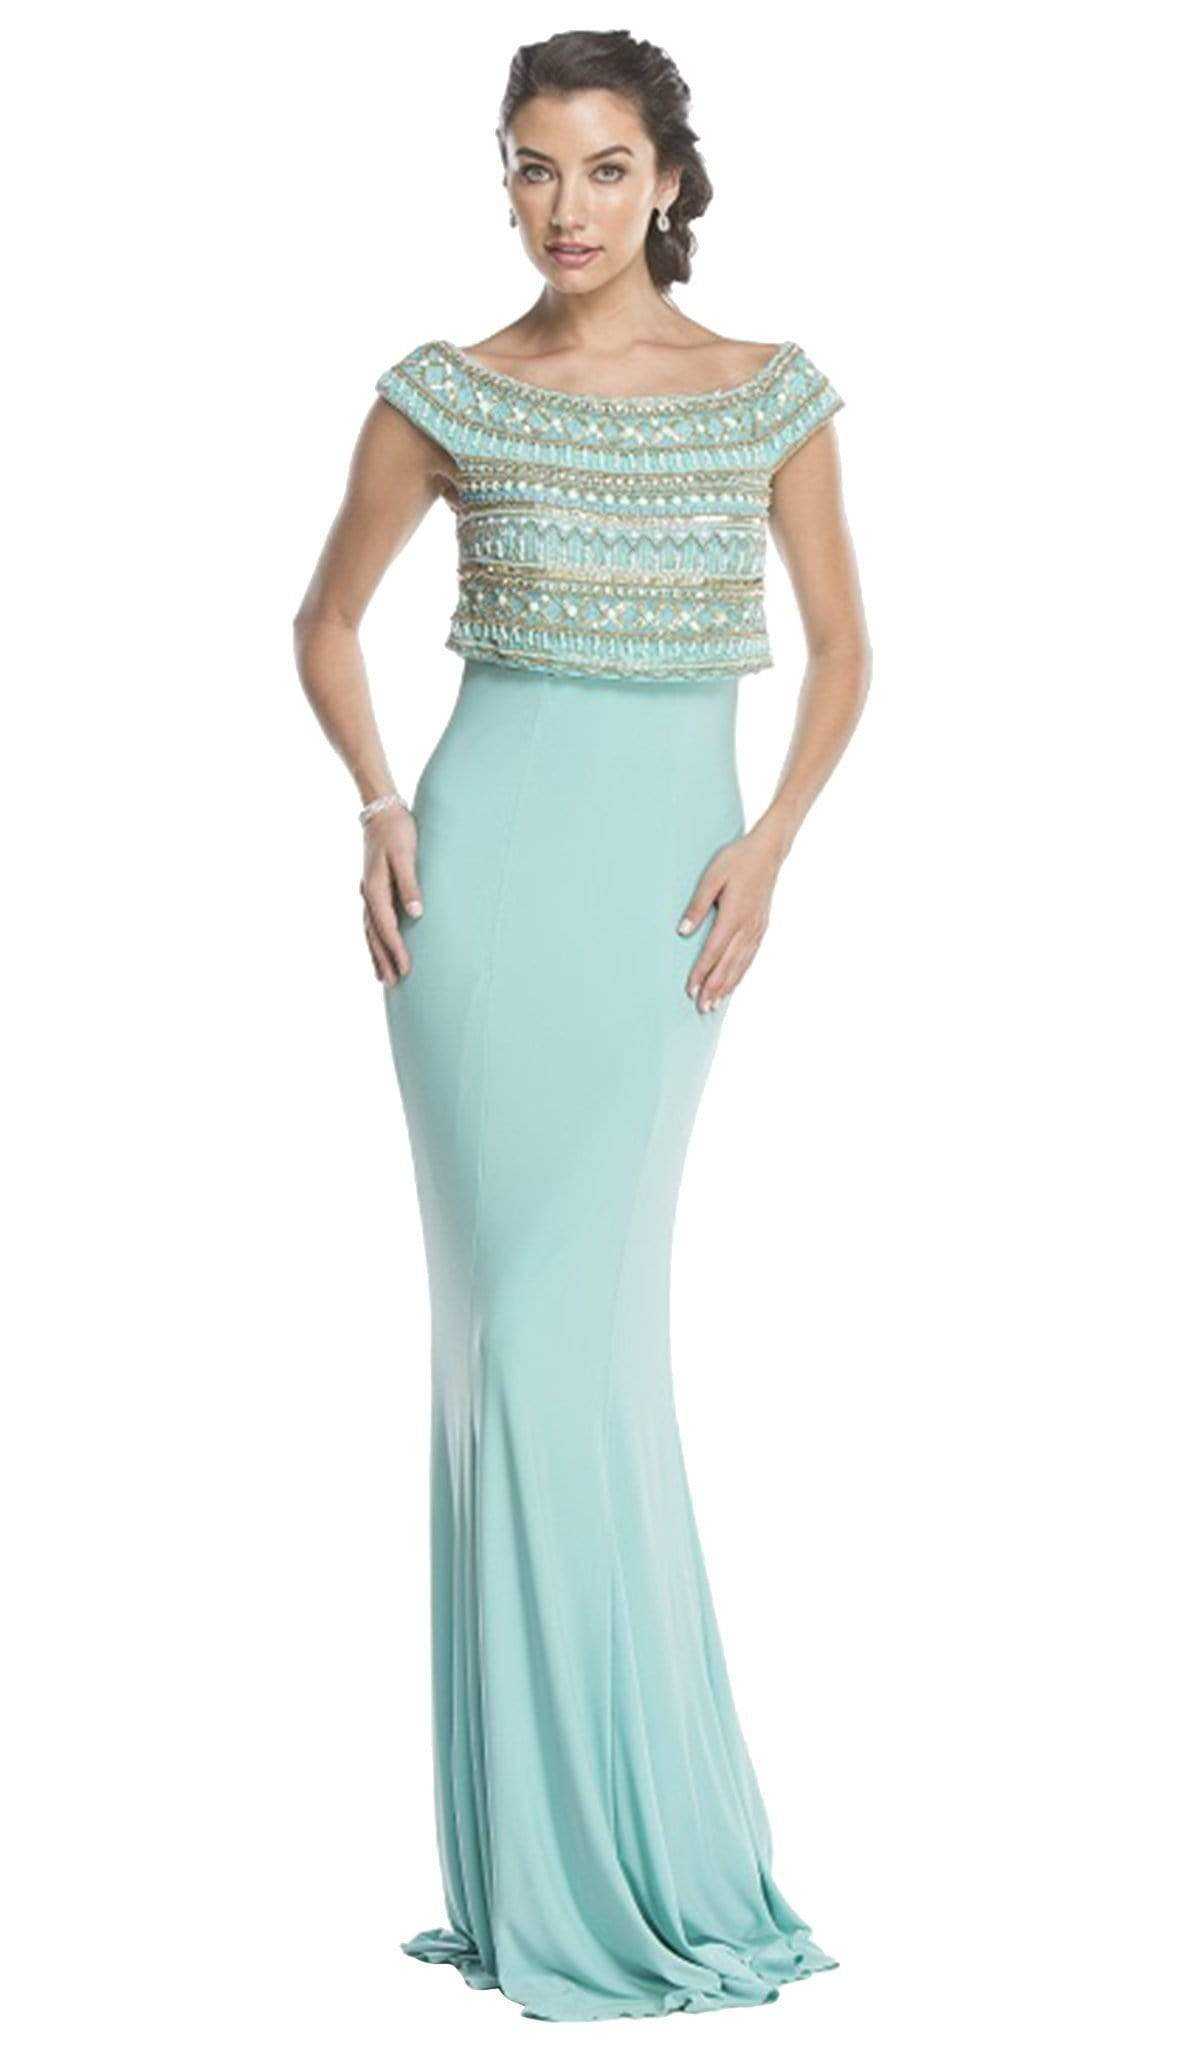 Aspeed Design, Aspeed Design - Bedazzled Bateau Neck Fitted Prom Dress